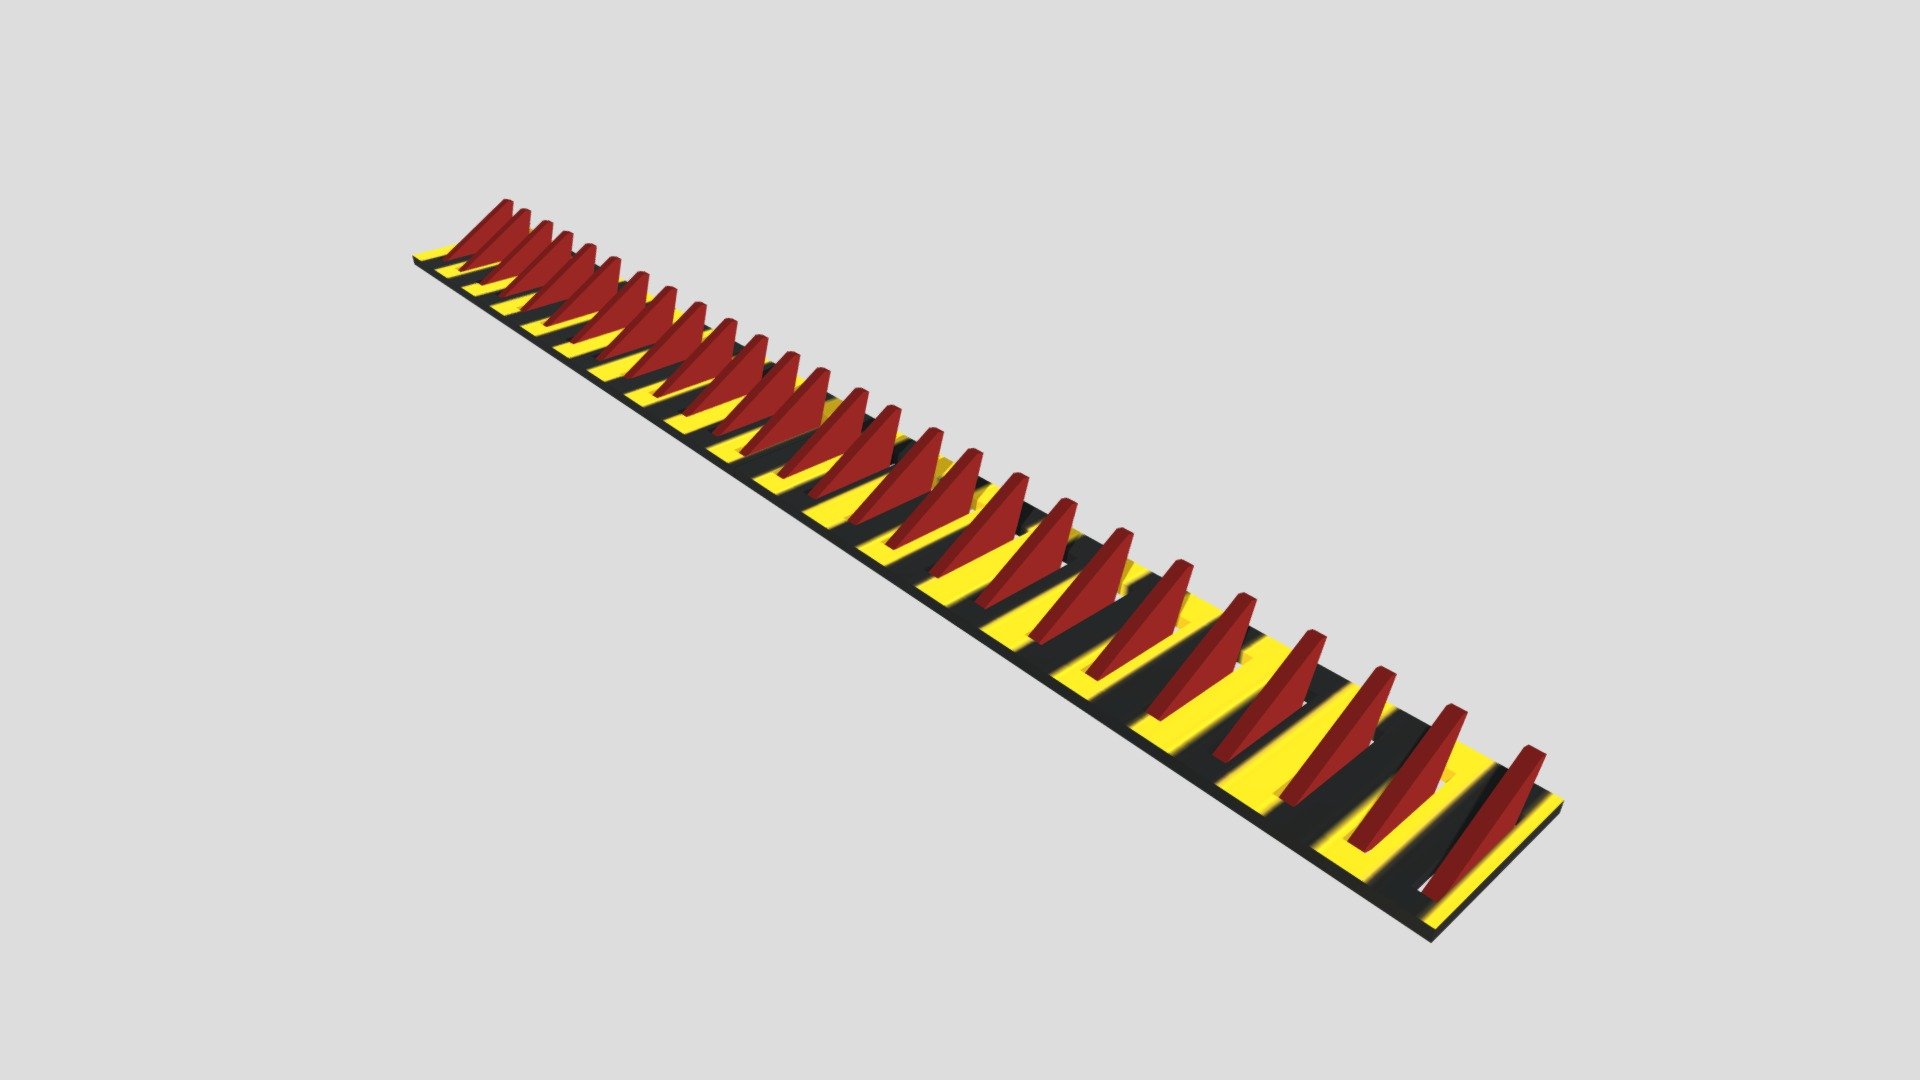 Leave A Like Please &lt;3

Low Poly Traffic Spikes Used in Parking Games 

A spike strip (also known as traffic spikes is a device used to impede or stop the movement of wheeled vehicles by puncturing their tires.

Buy Me a Coffee

https://www.buymeacoffee.com/syedabbas - Traffic Spikes - Download Free 3D model by PropShop™ (@syedabbas0815) 3d model